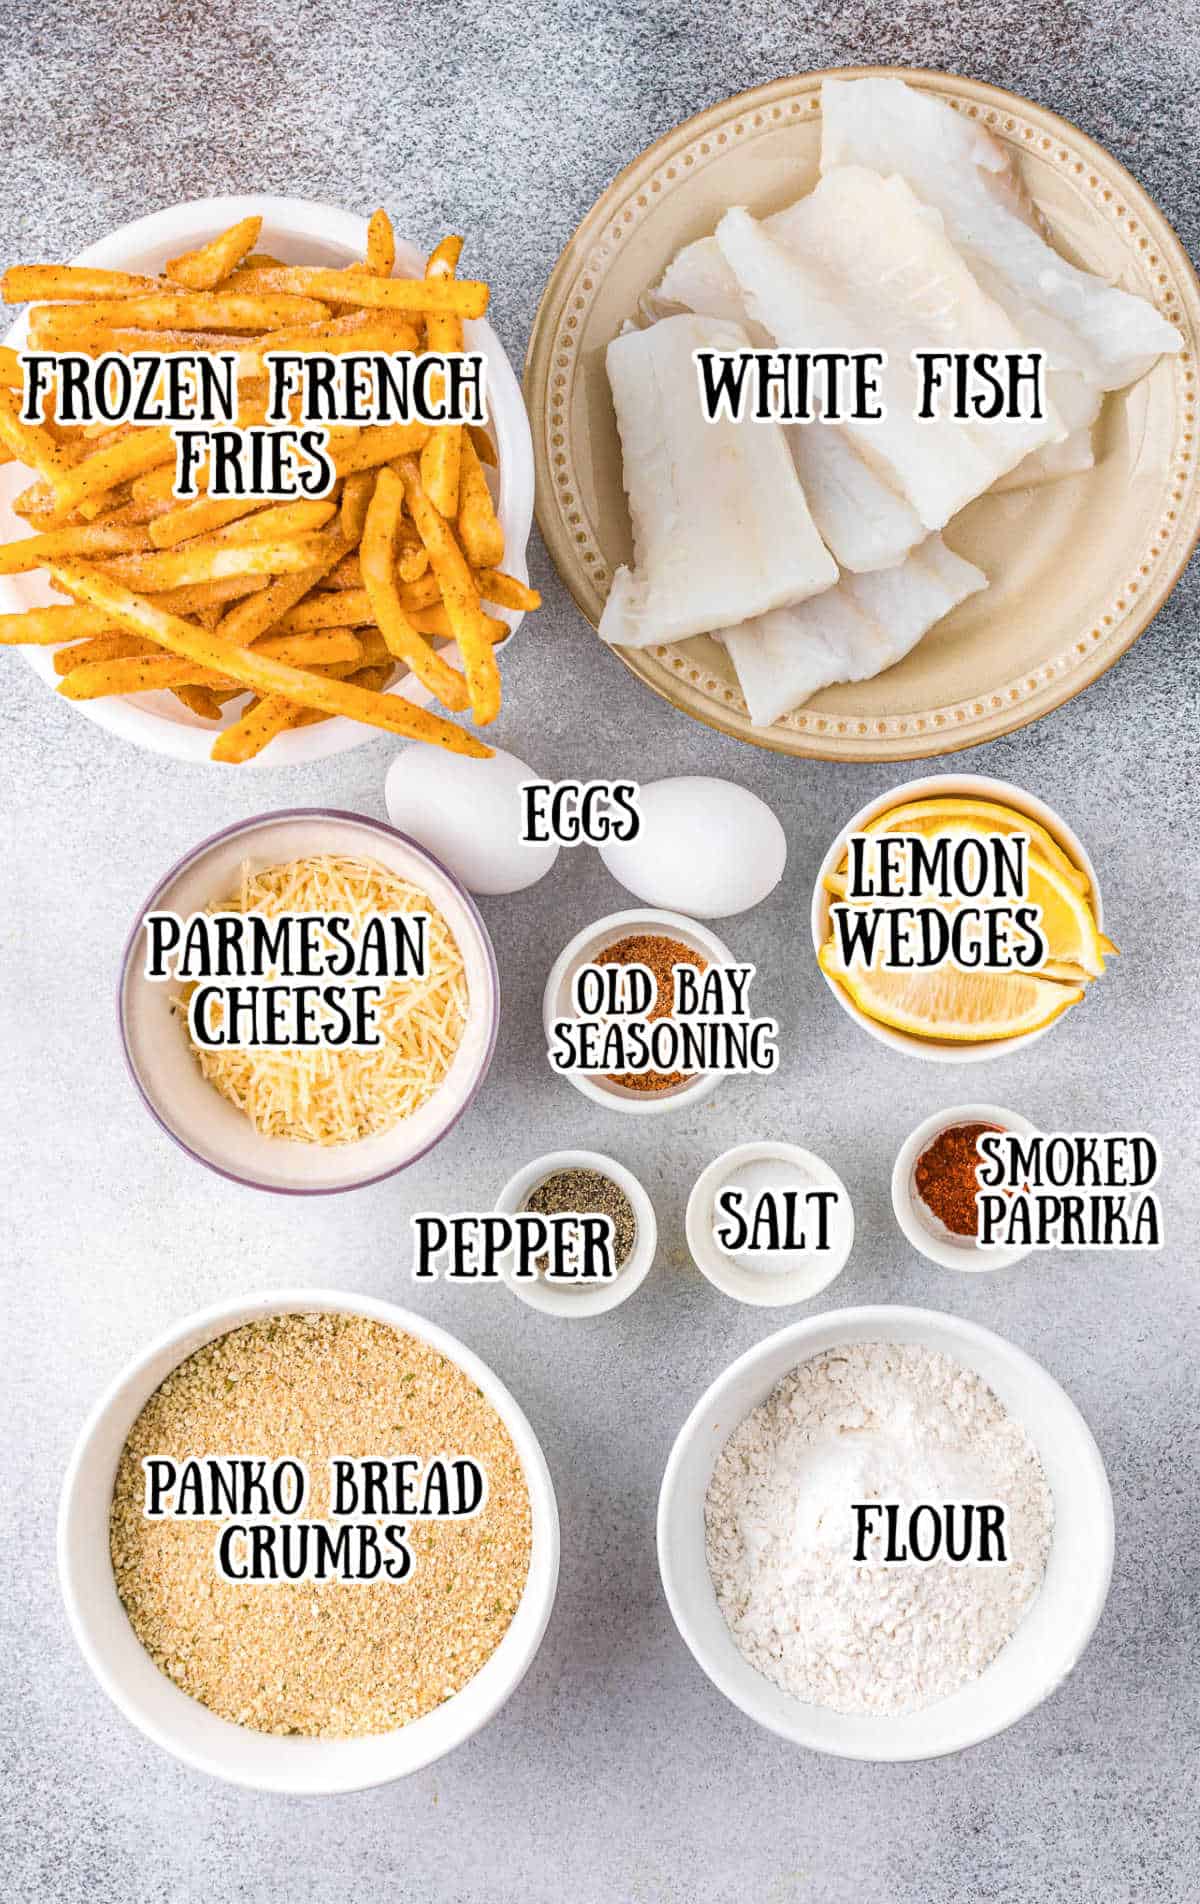 All the ingredients needed for air fryer fish and fries.